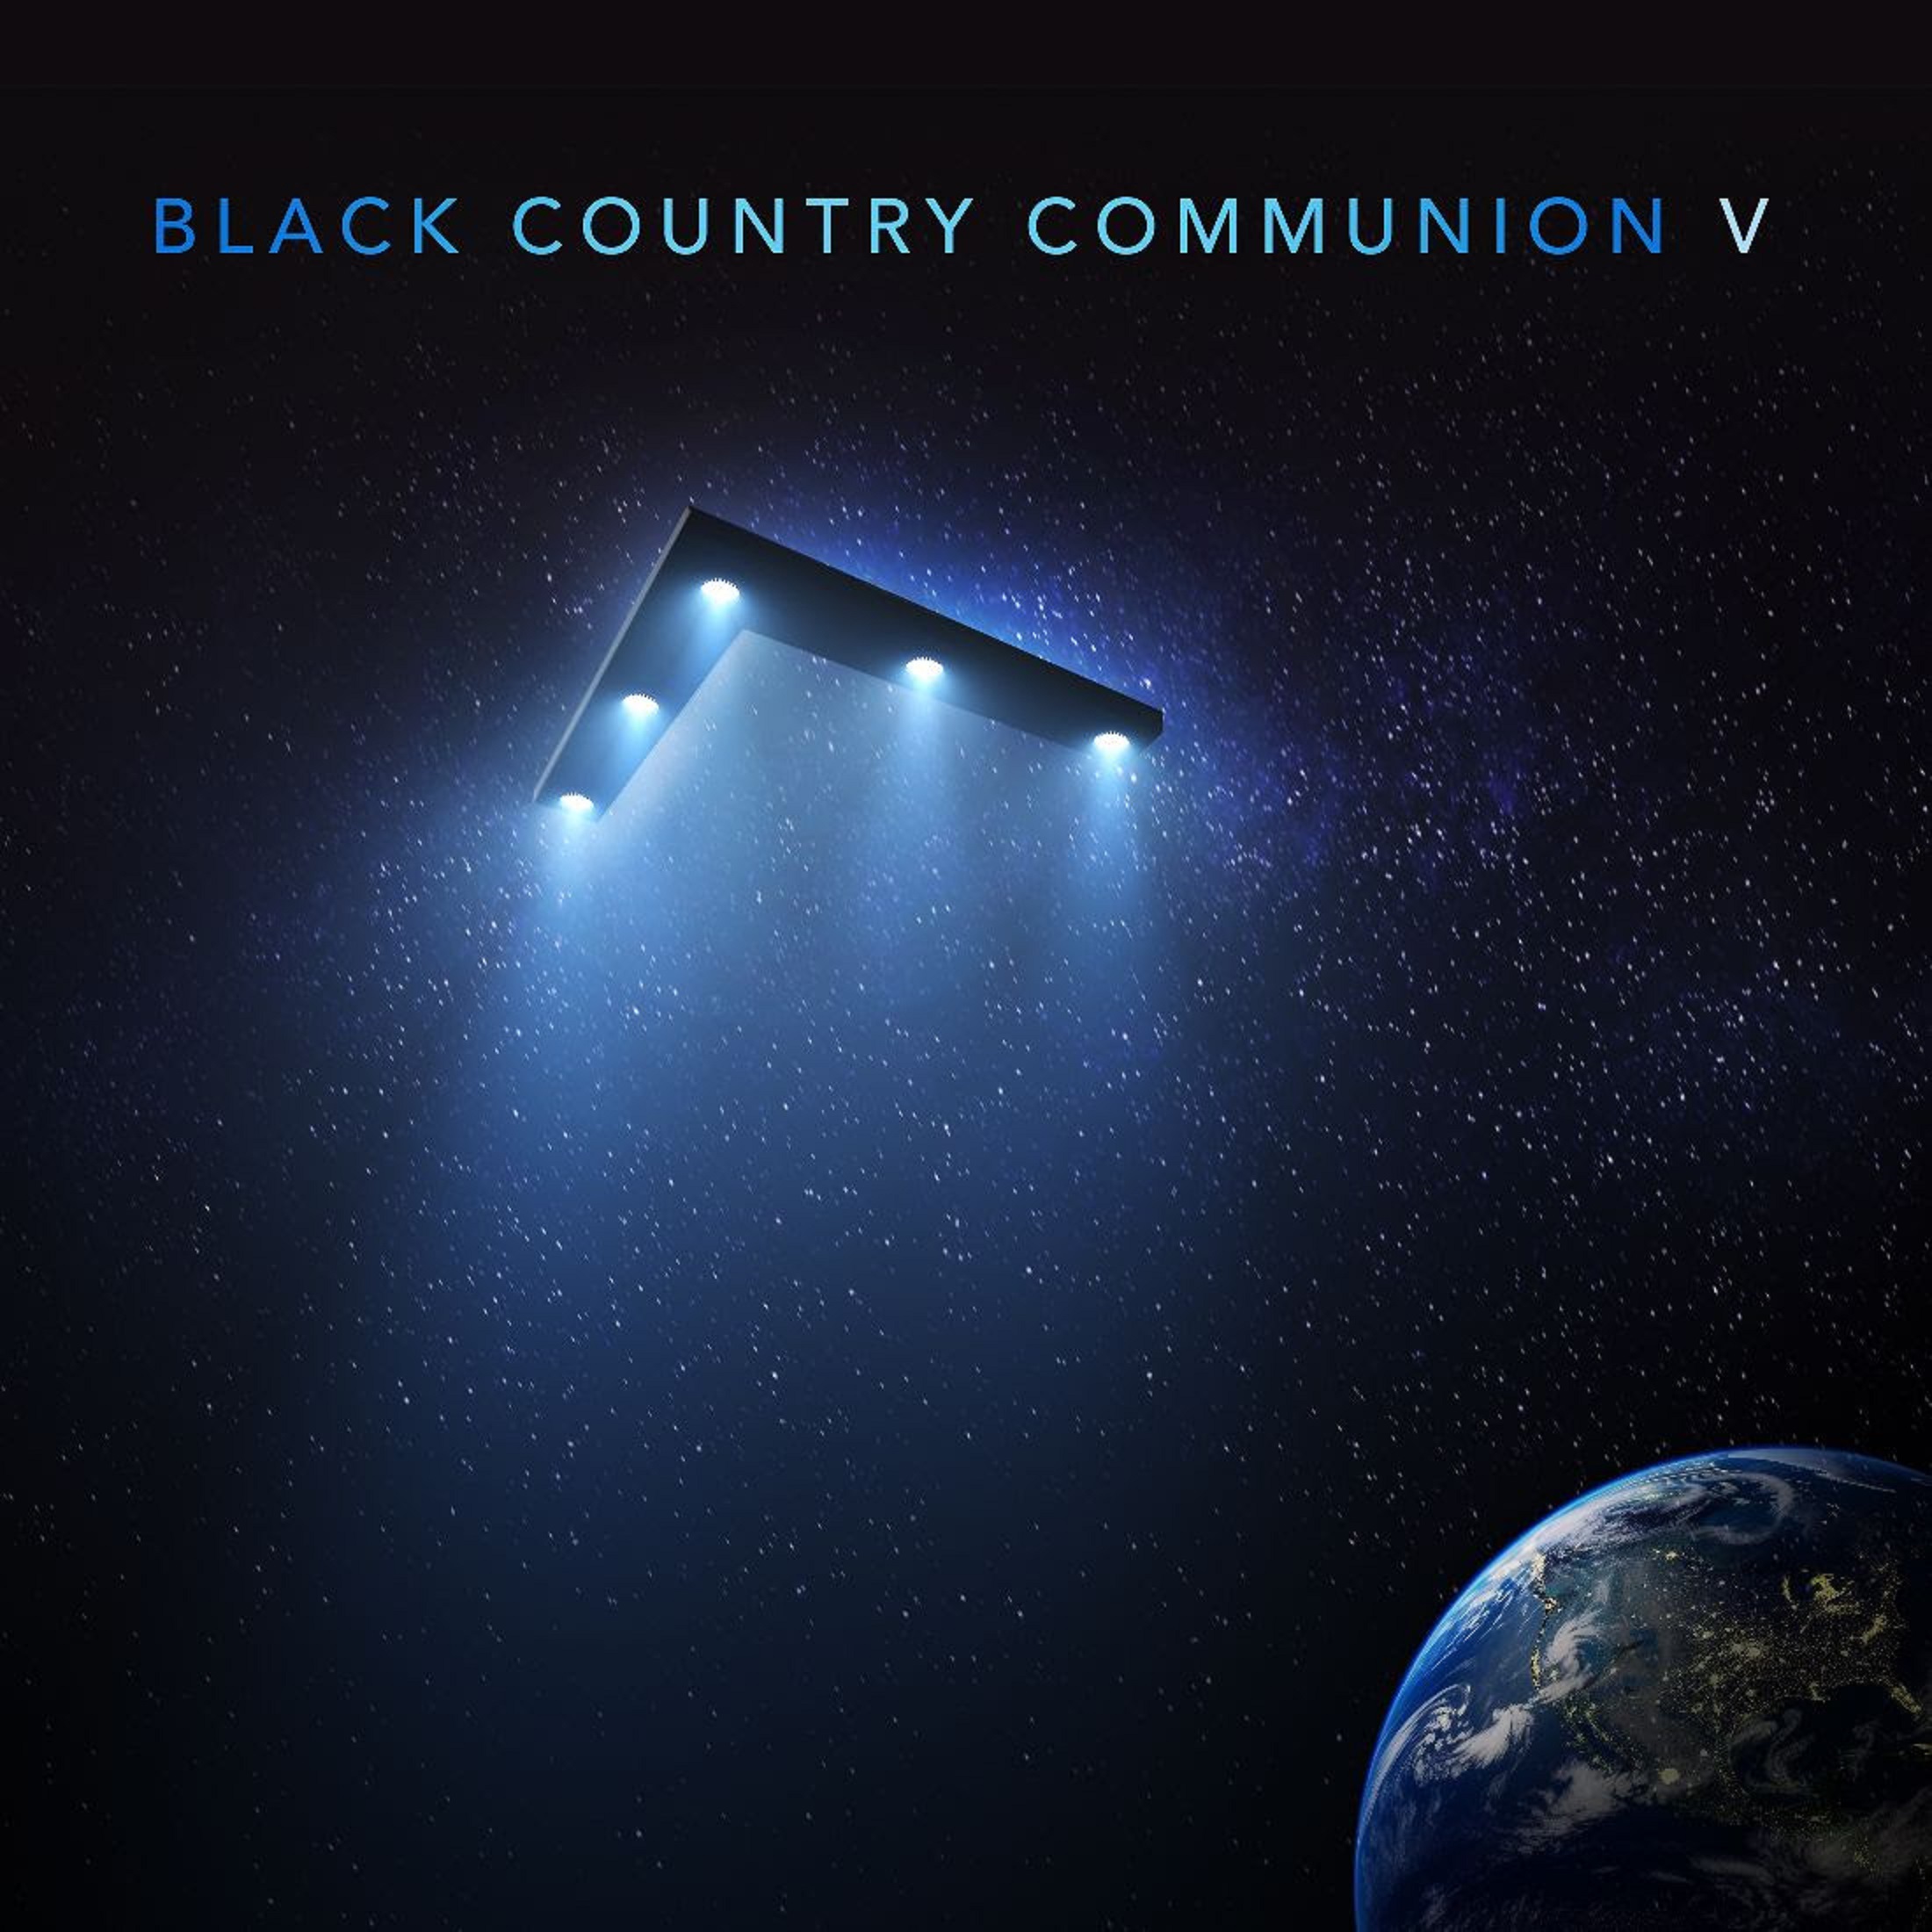 Supergroup Black Country Communion Announces Highly Anticipated New Album 'V' and Unleashes Lead Single "Stay Free"